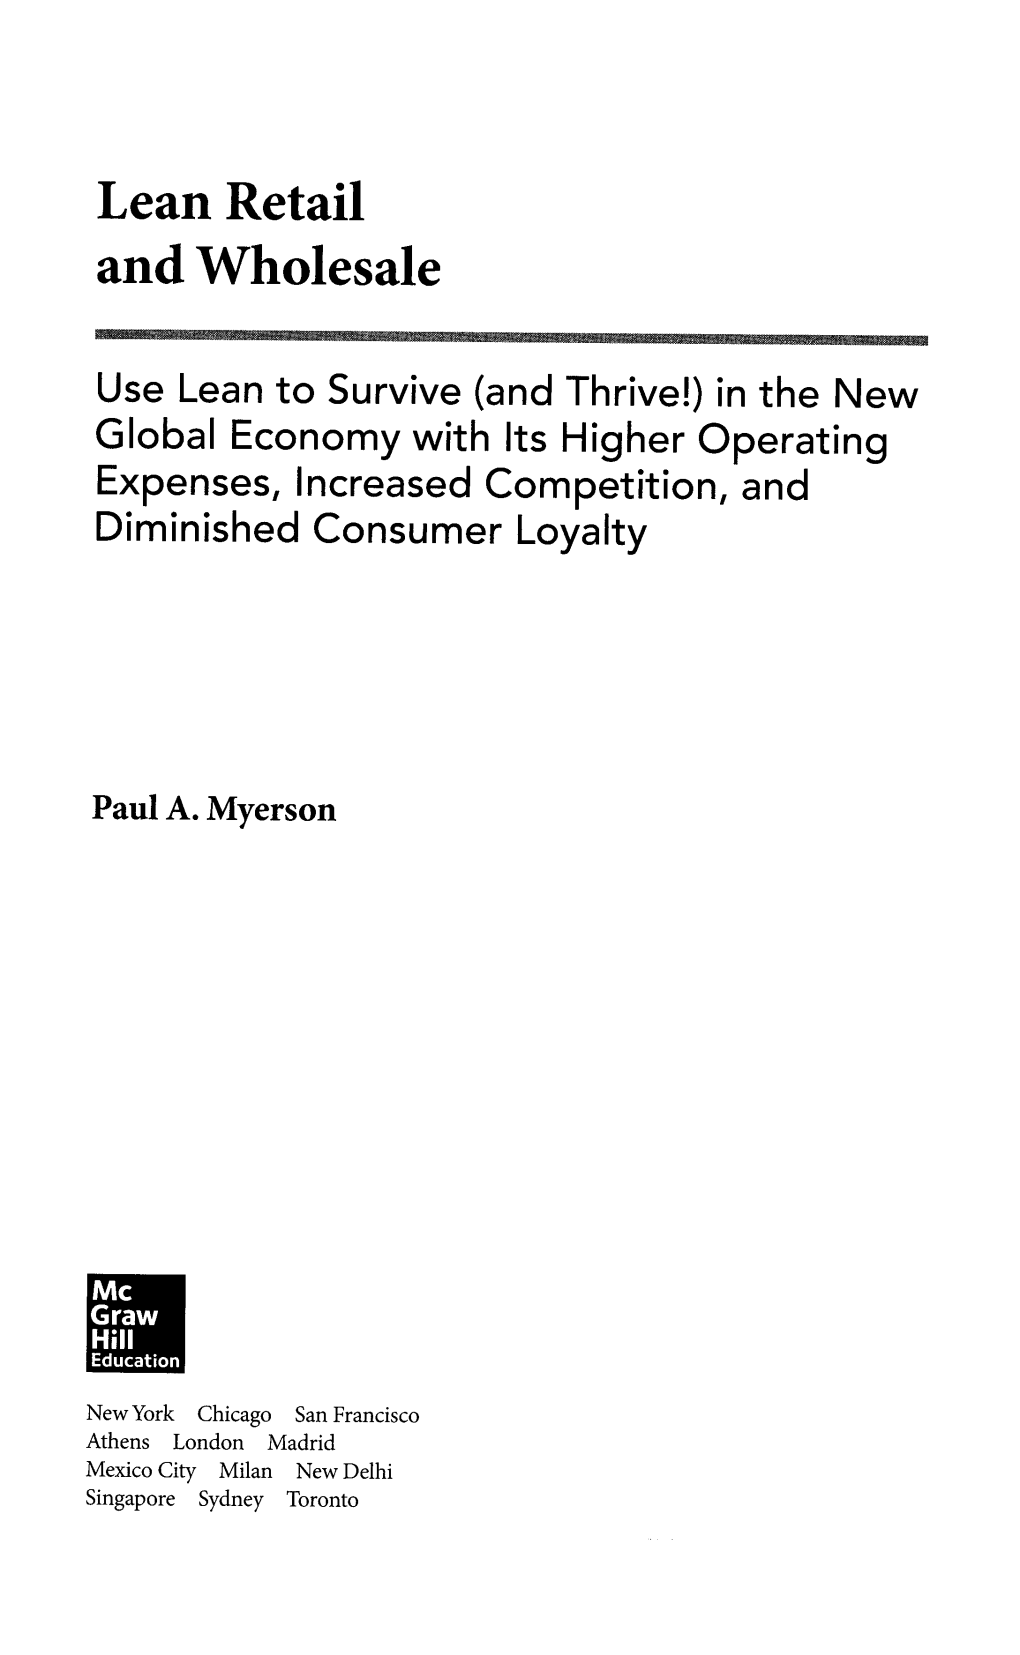 Lean Retail and Wholesale : Use Lean to Survive (And Thrive!)